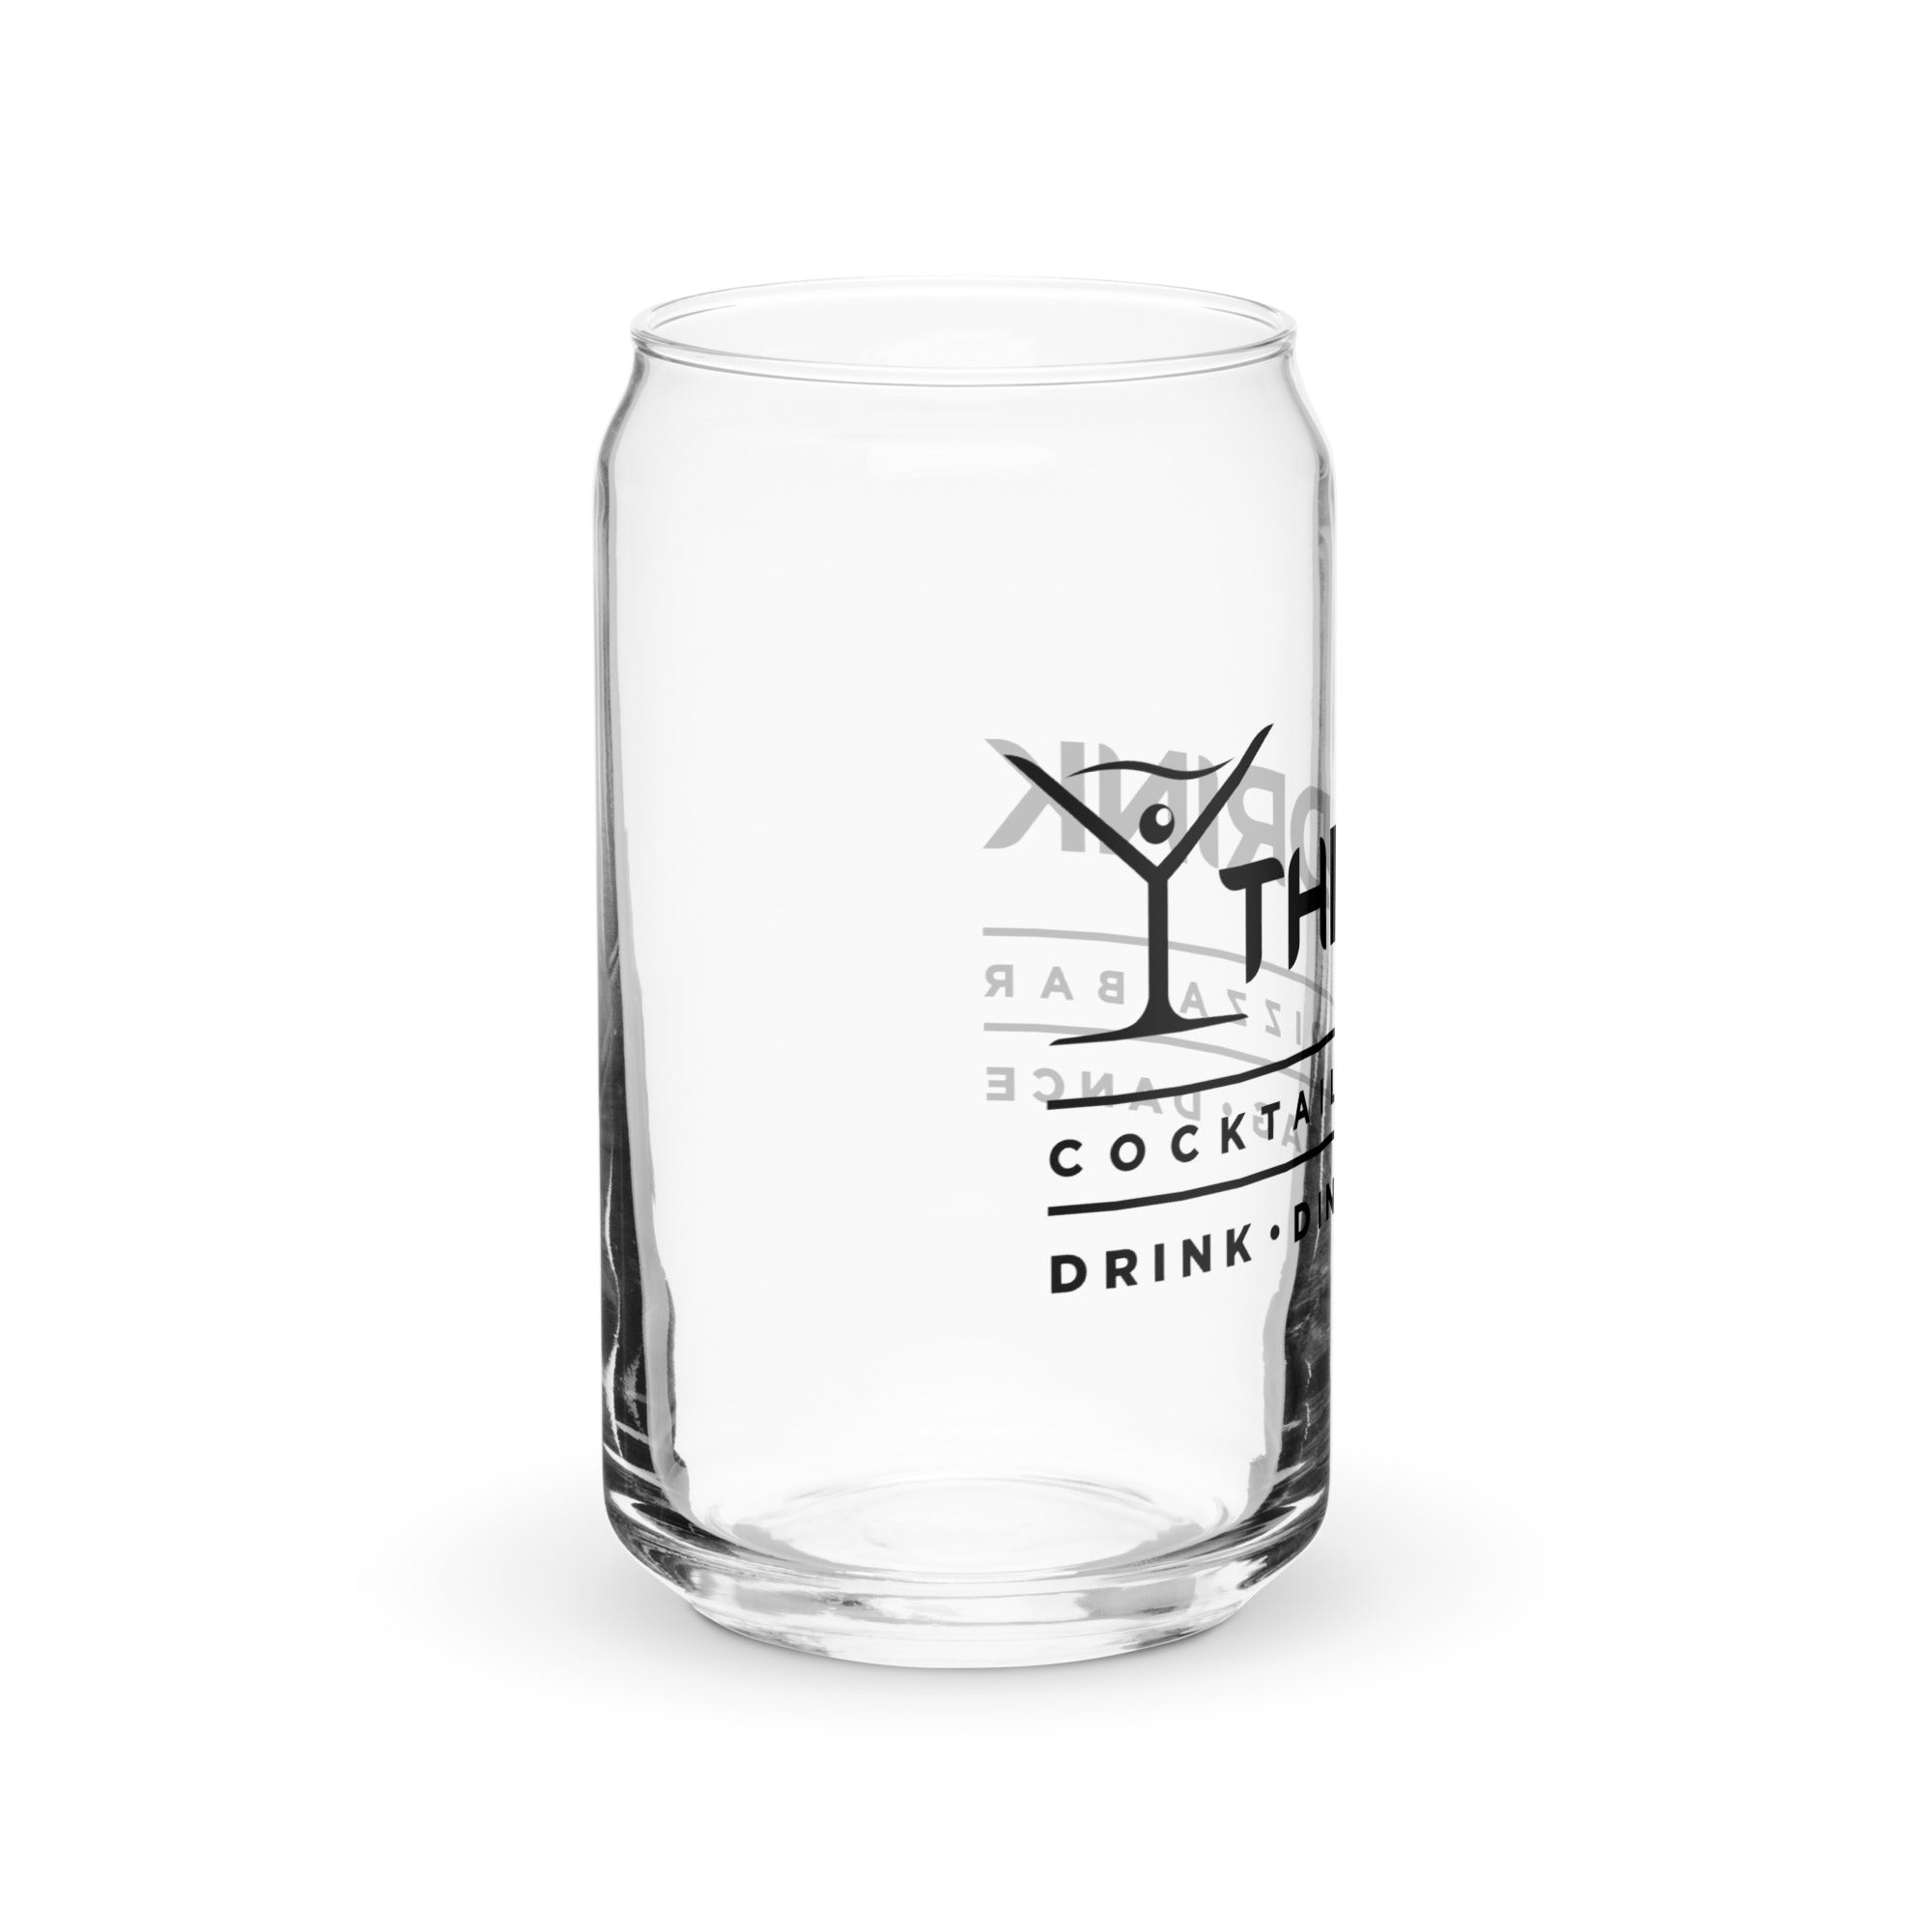 Offical Drink Glass